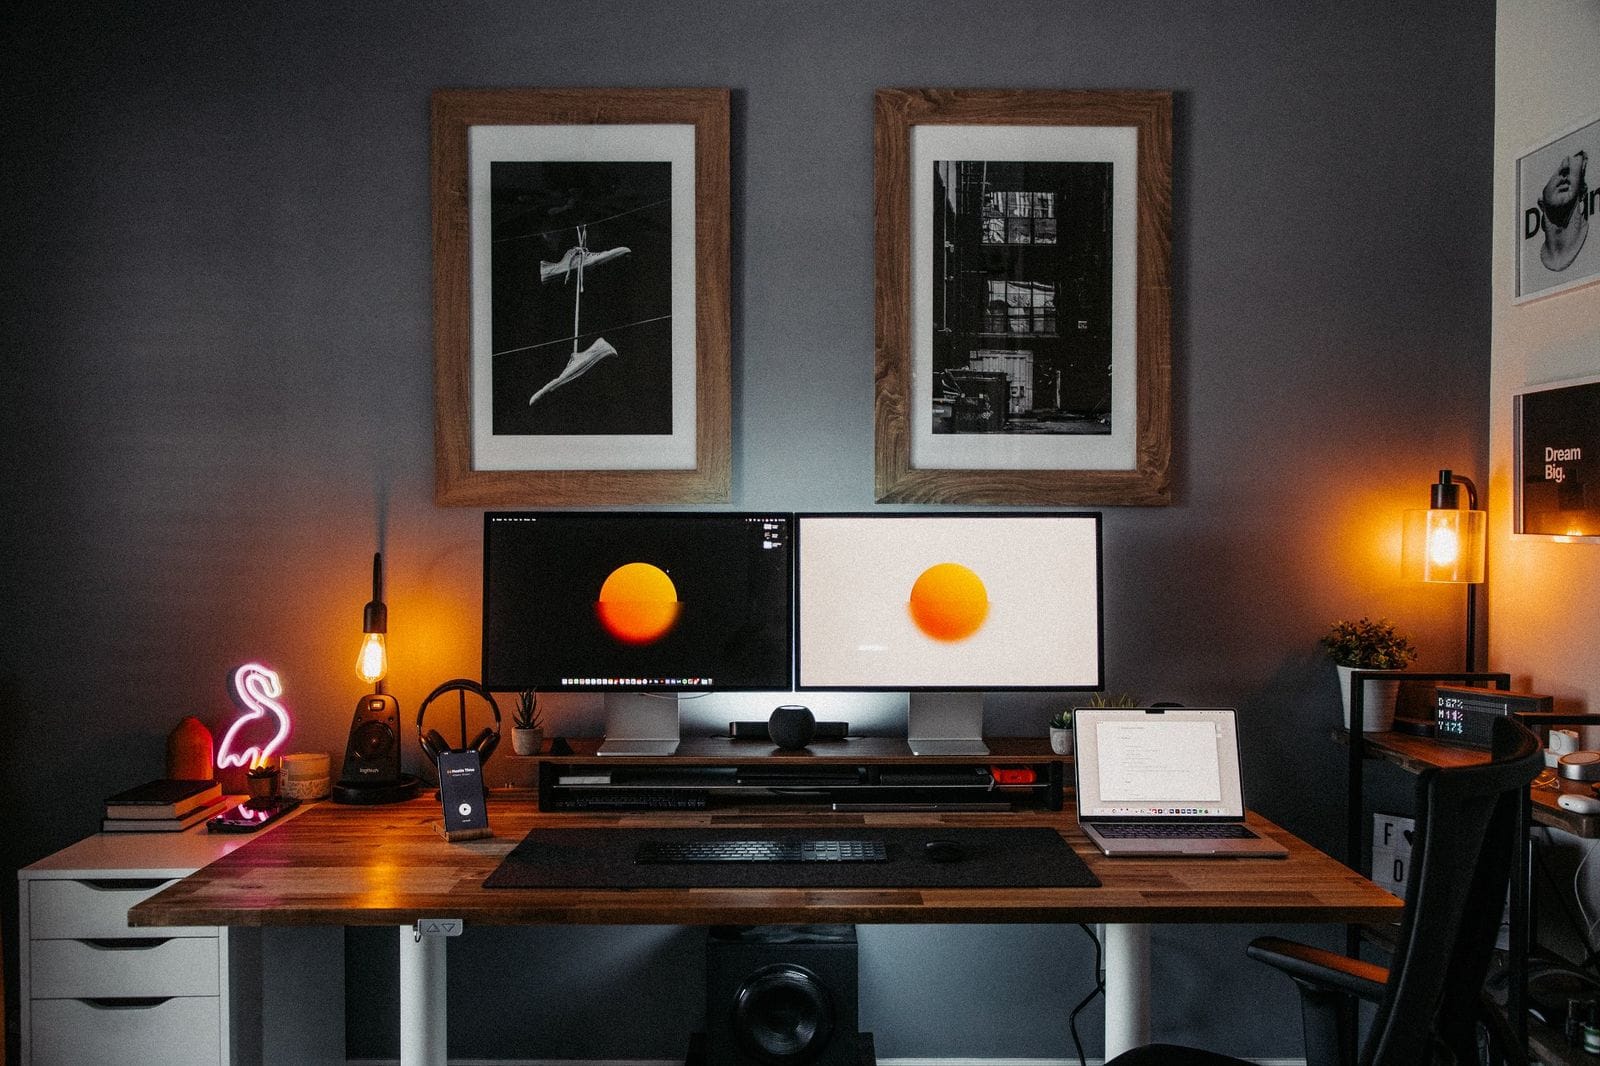 A home office setup with dual Apple Studio Display monitors on a wooden desk, featuring a neon flamingo lamp, a hanging Edison bulb, framed black and white photographs on the wall, and ambient lighting